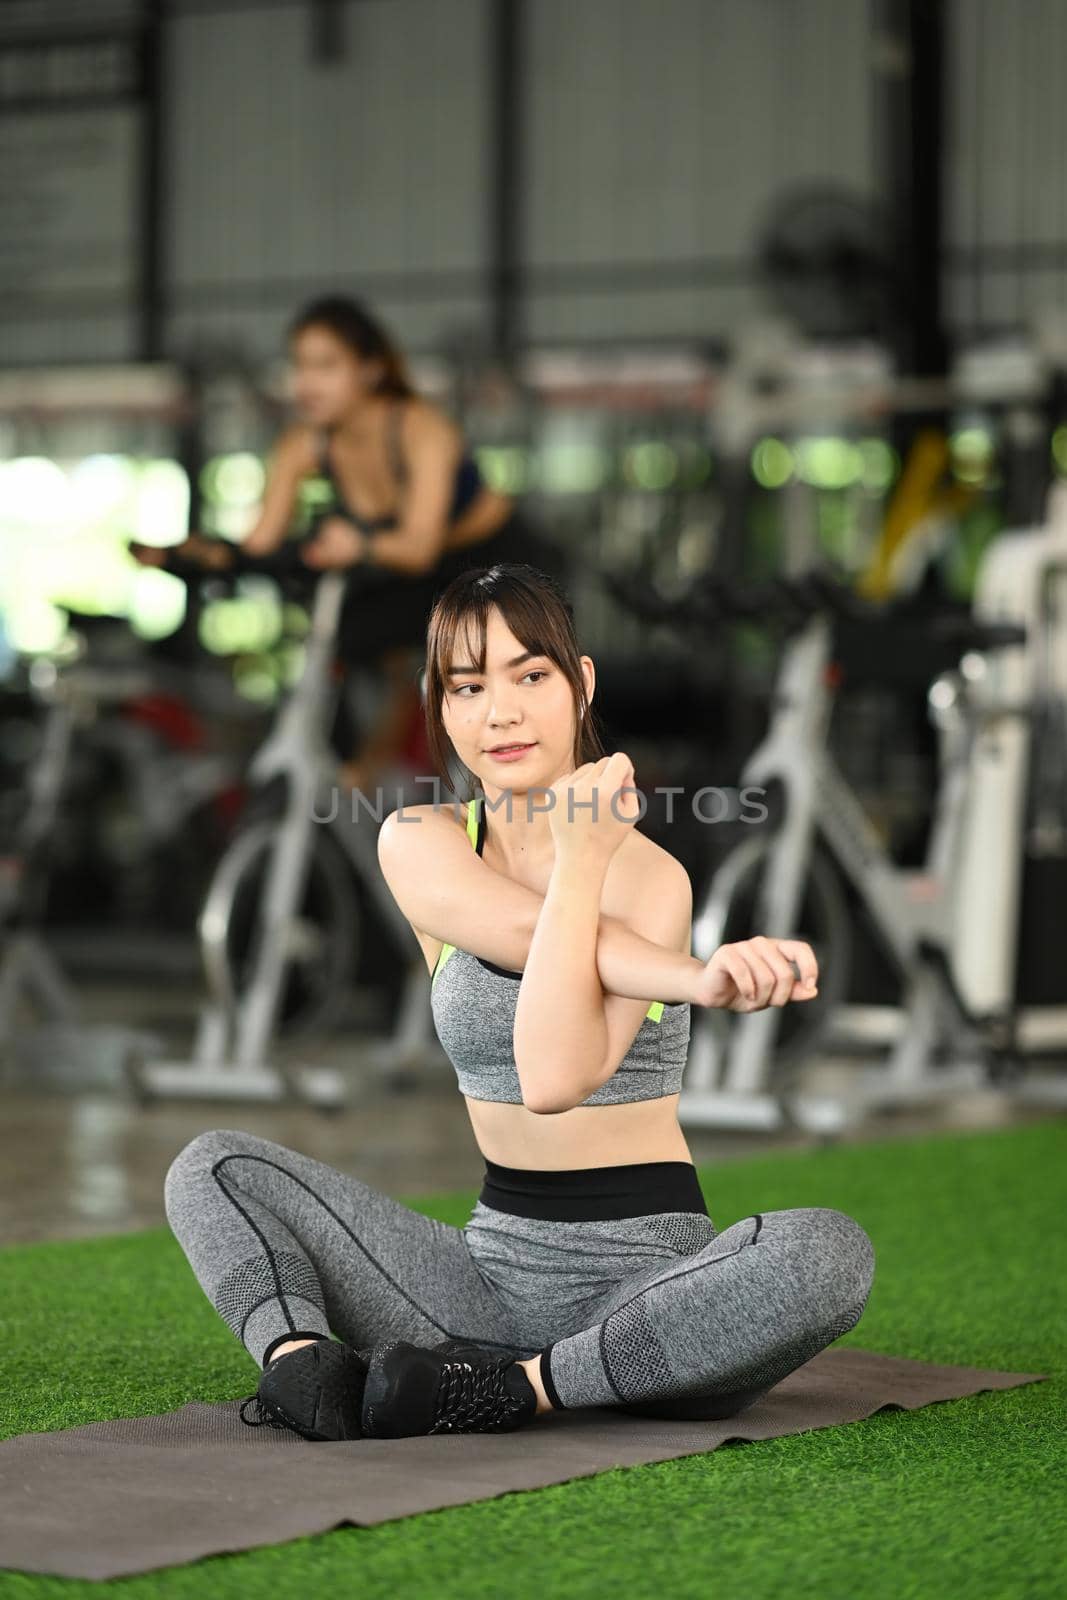 Fitness woman in sportswear warming up before workout.